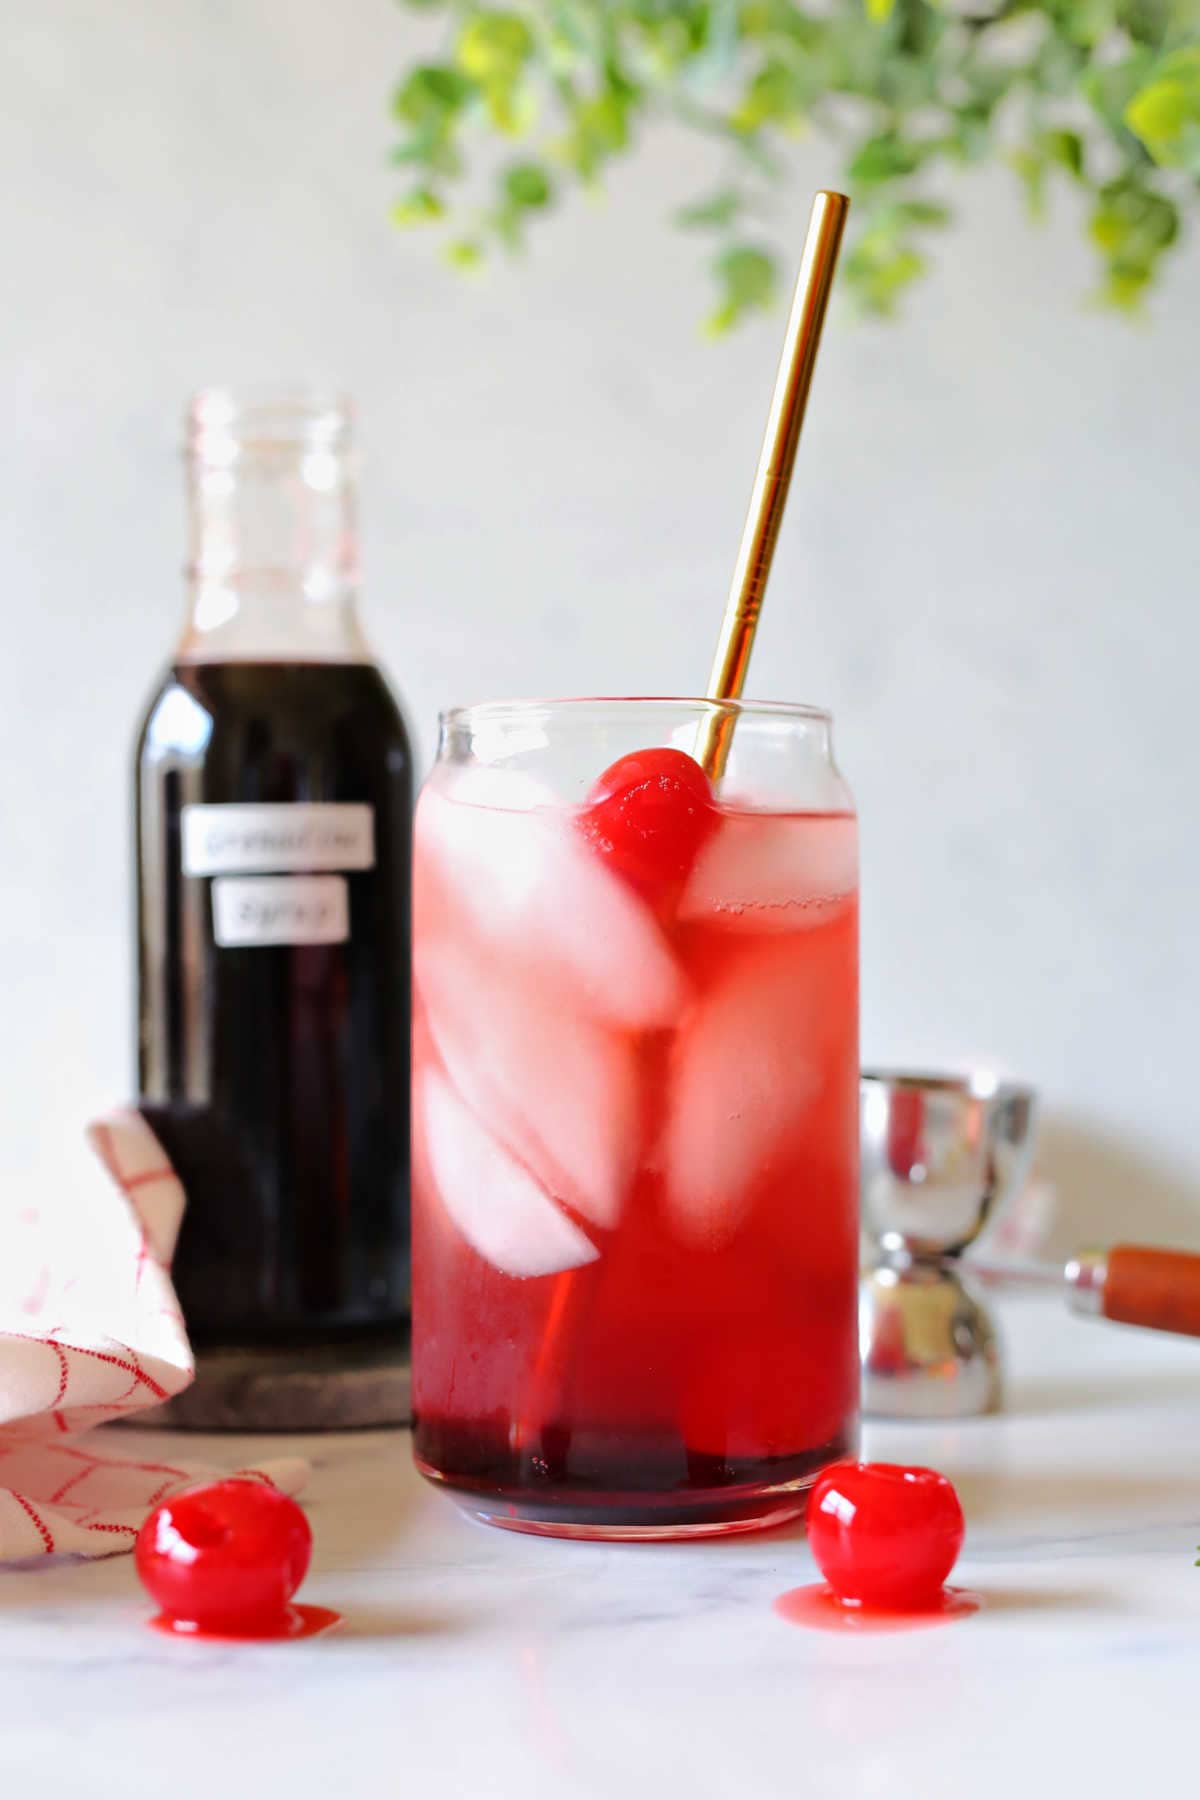 shirley temple drink made with homemade pomegranate grenadine